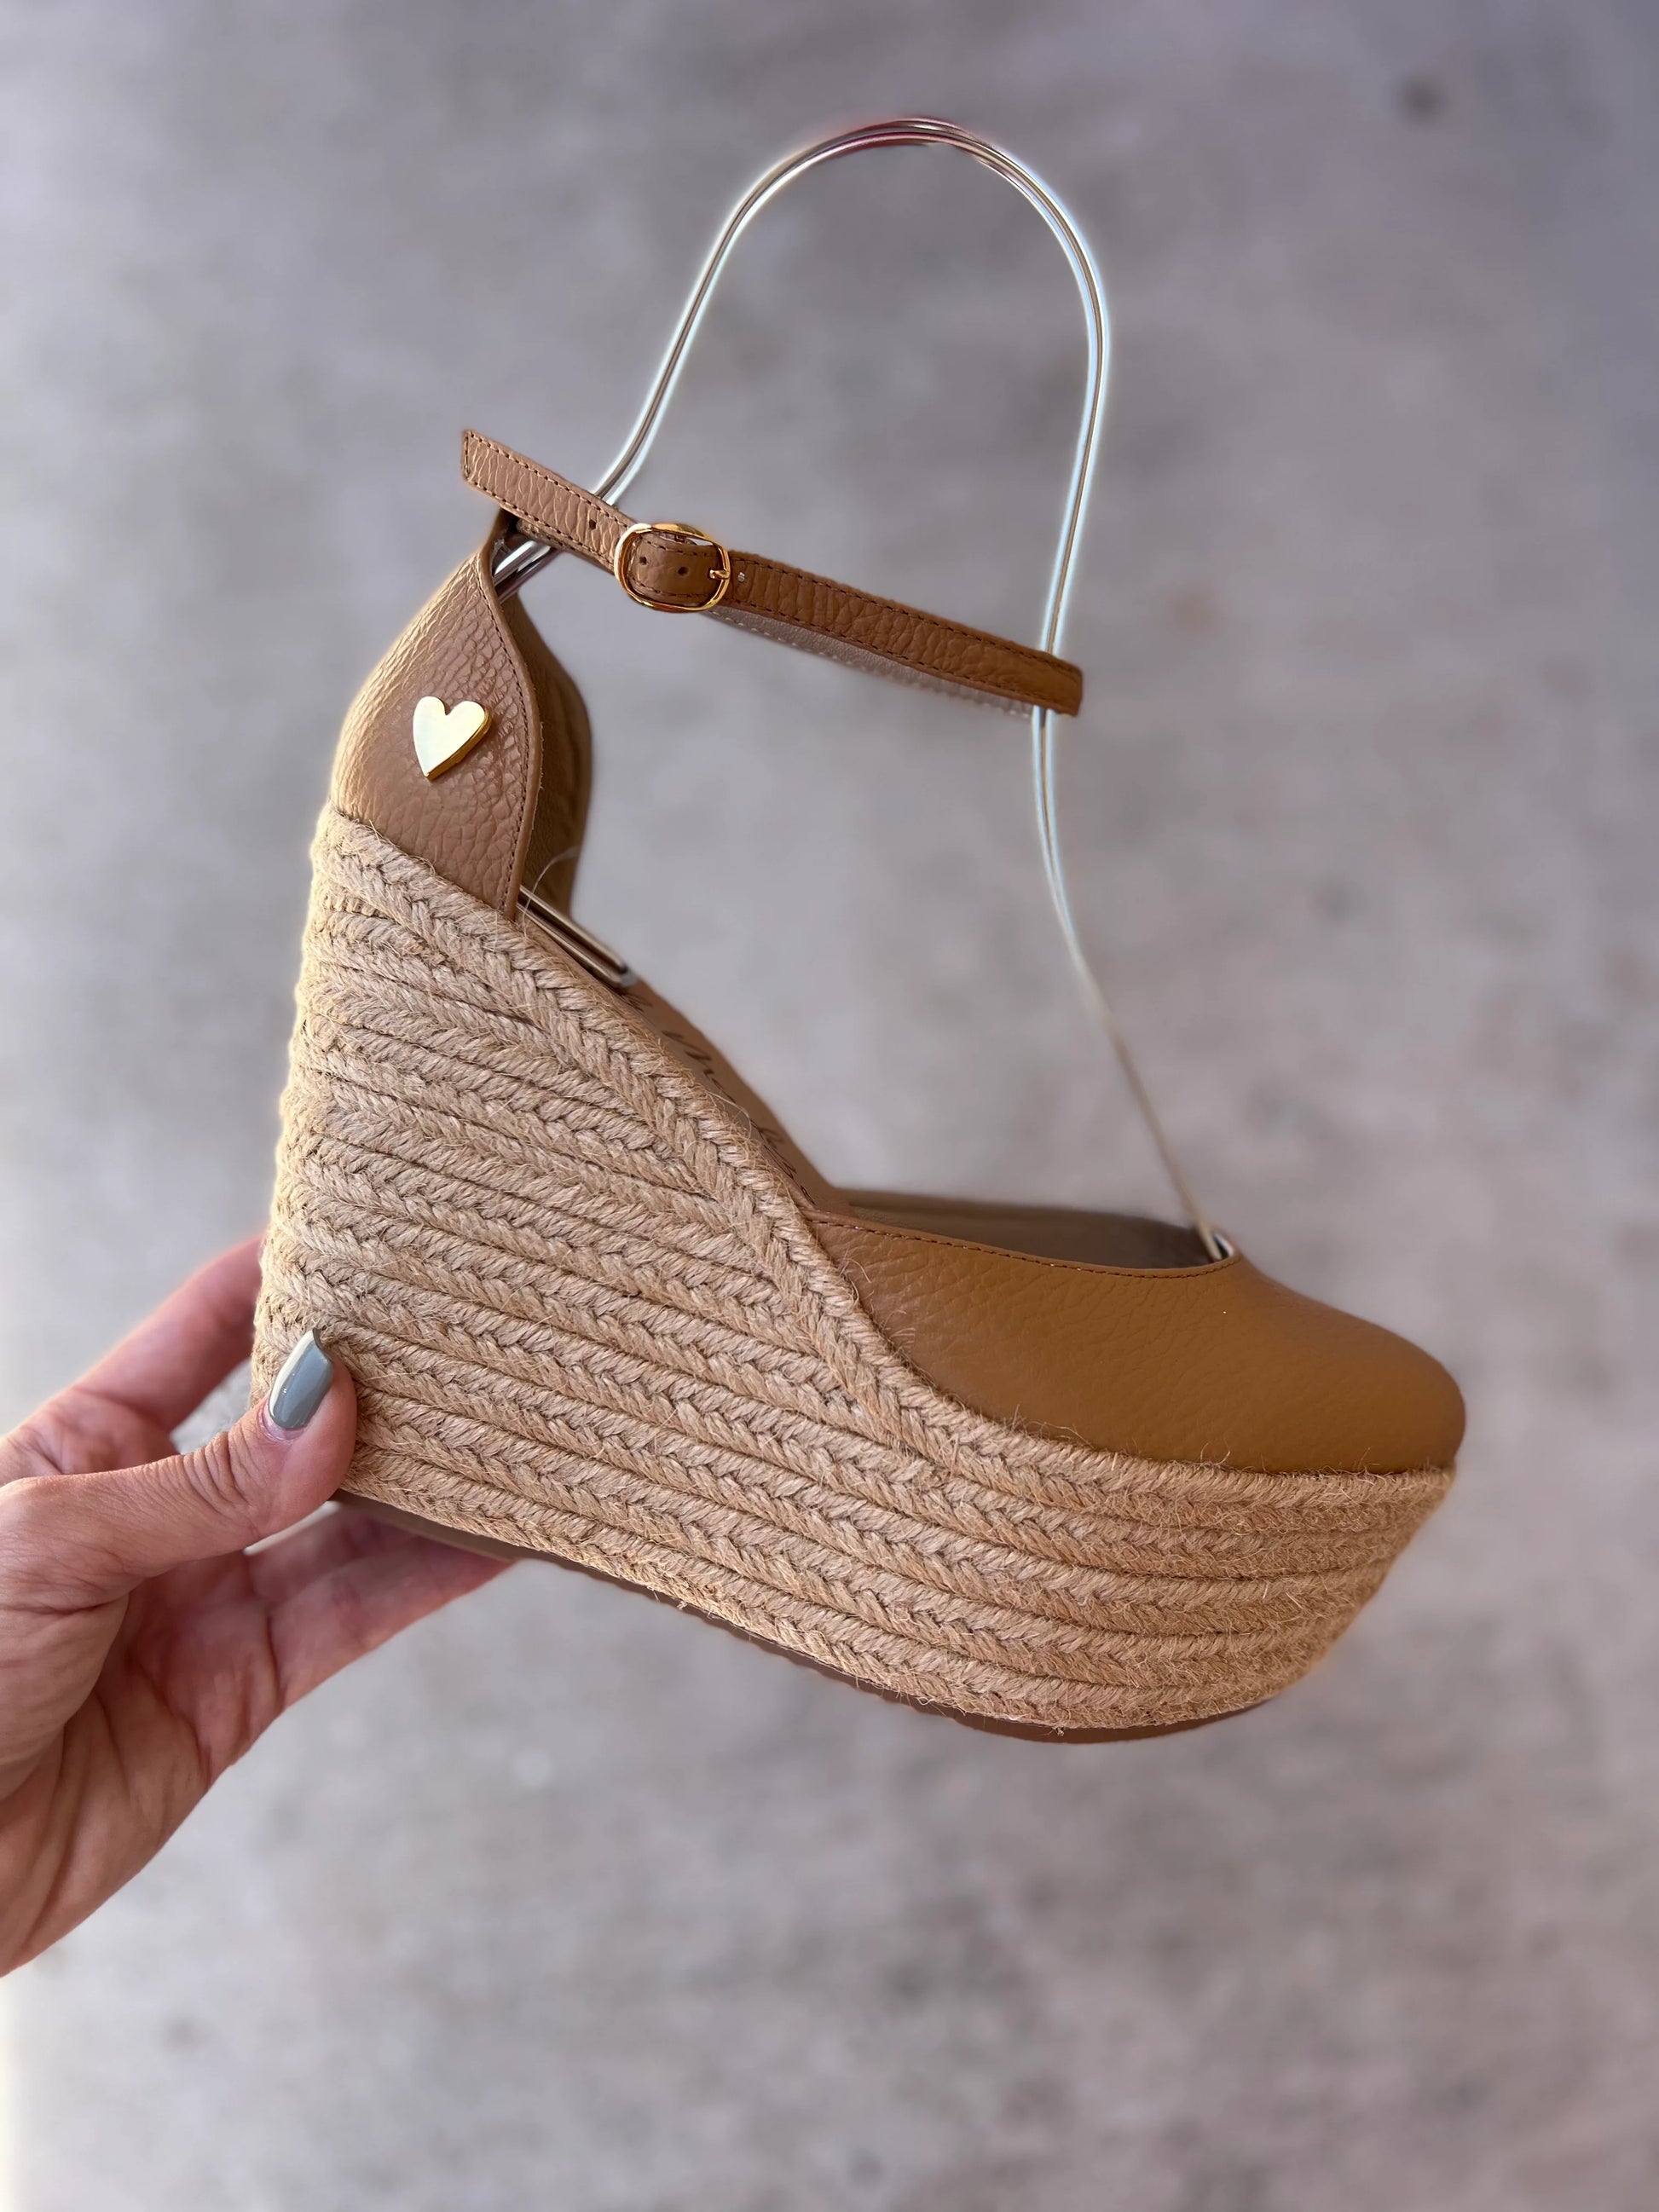 Camel Leather Espadrilles by Nataly Mendez Natural jute base Genuine leather upper Genuine leather insole. 100% made in Colombia! 4 inch heel height 1.75 inch platform Comes with strap closure and beige hiladilla laces.